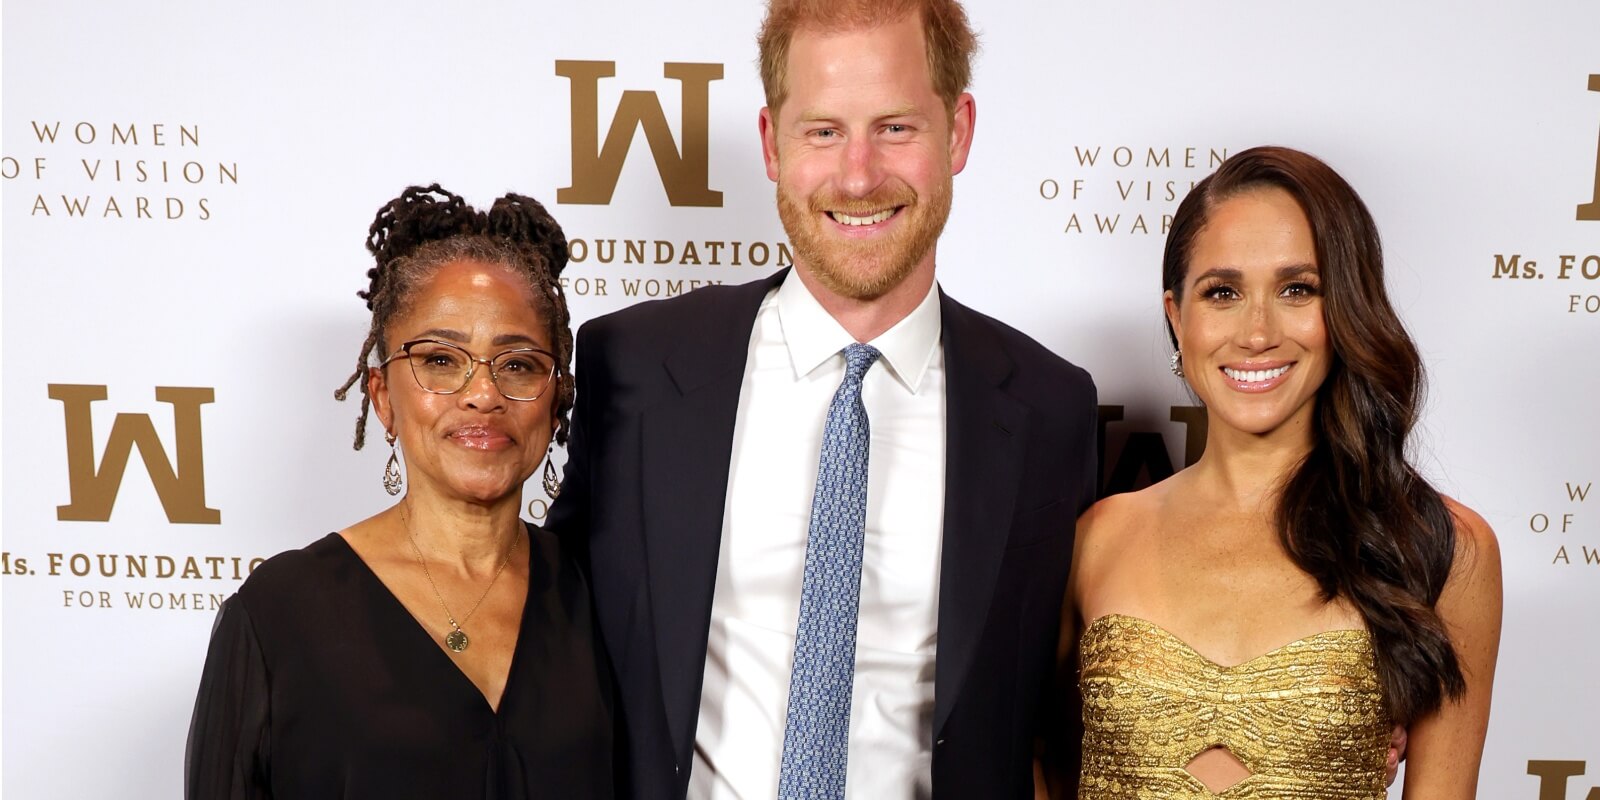 Doria Ragland, Prince Harry and Meghan Markle at the Women of Vision Awards in New York City.